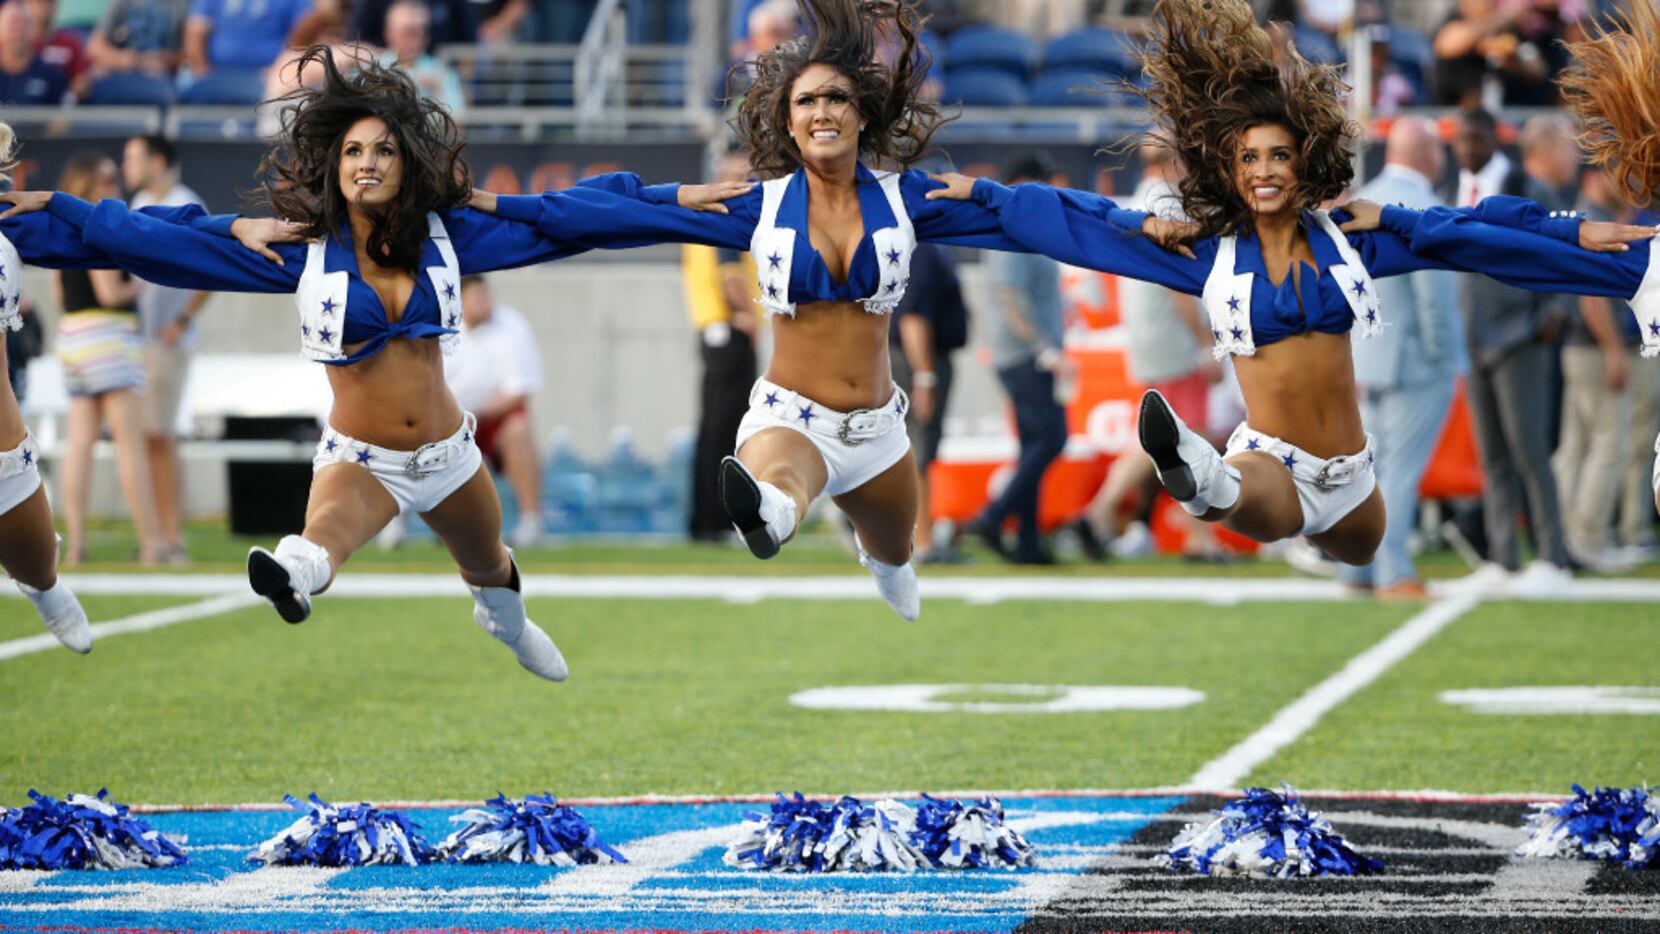 Longtime Cowboys cheerleader on how she was told to handle groping